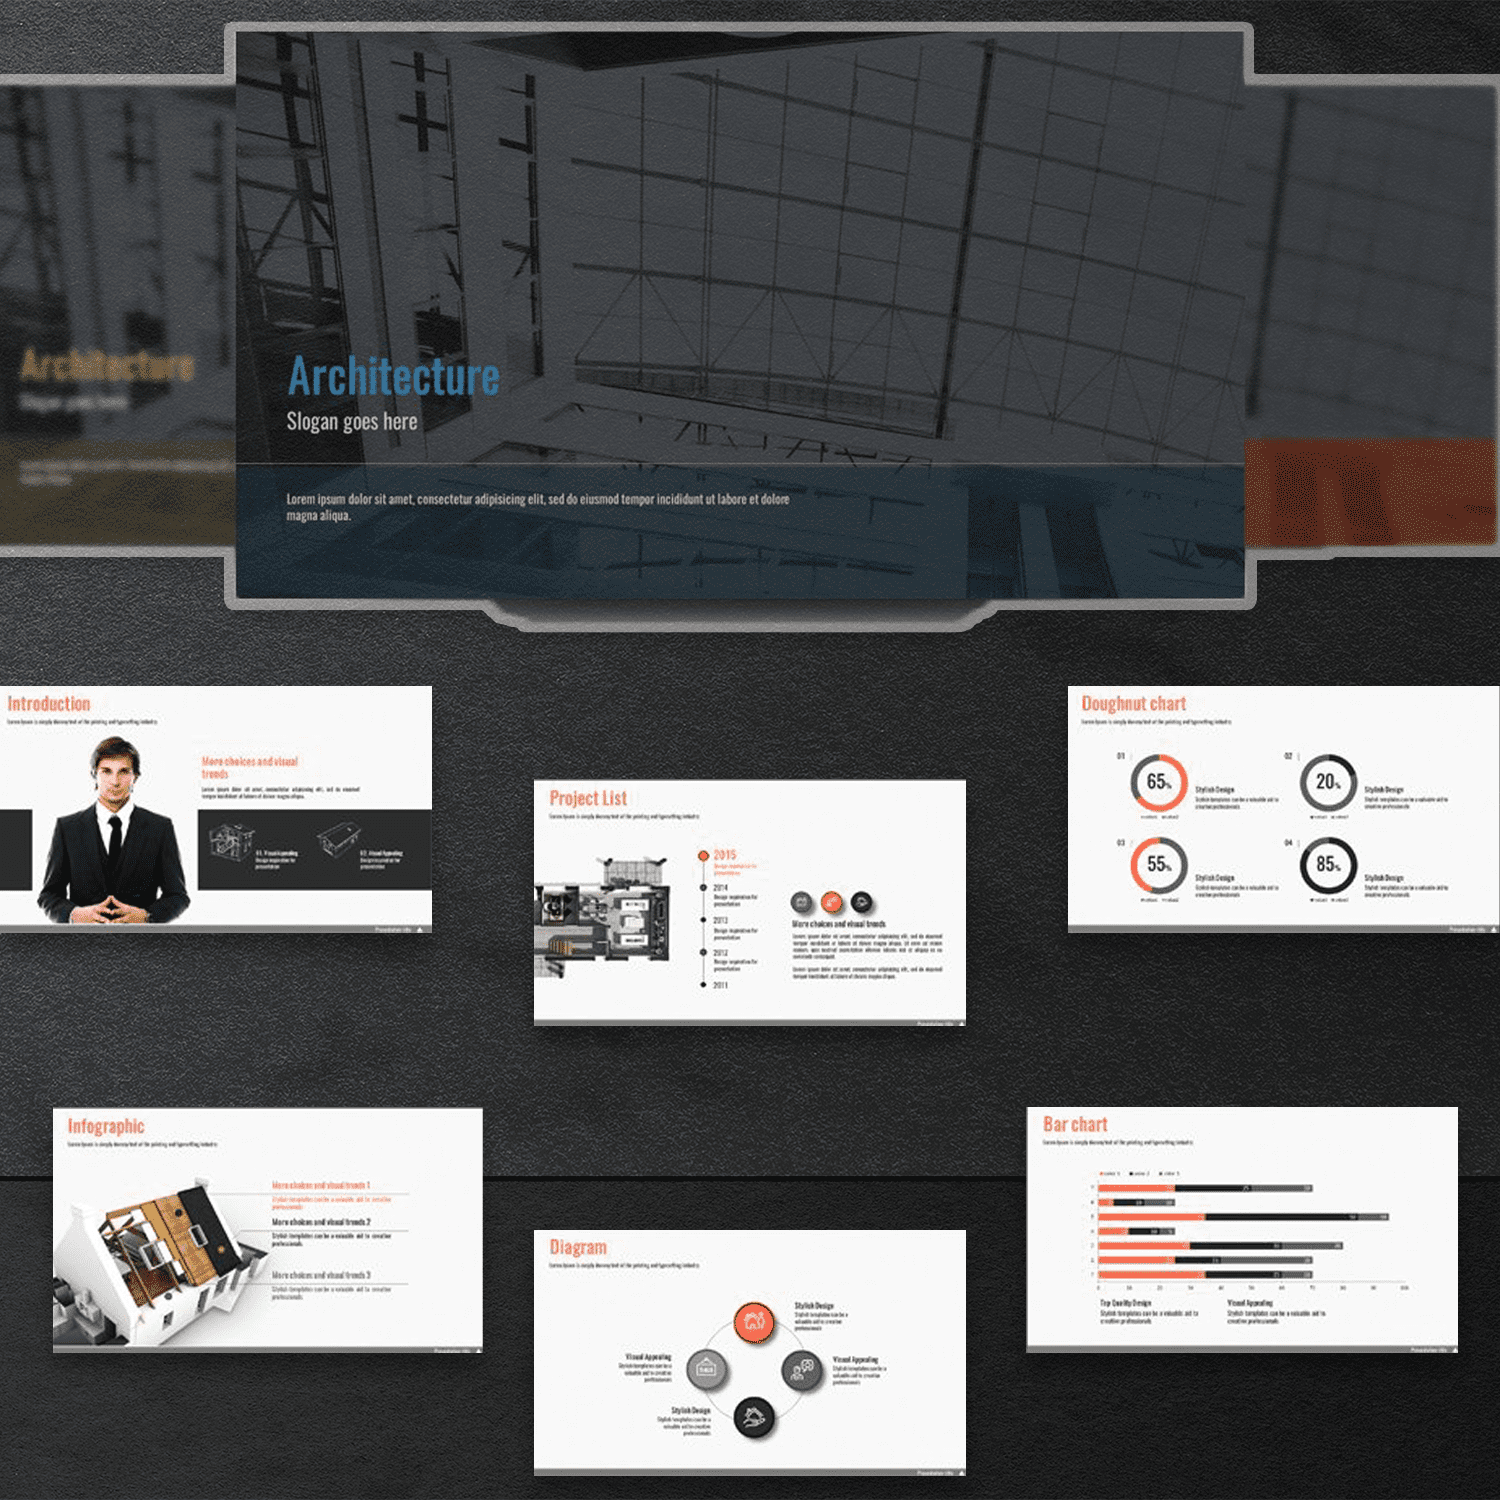 This Architecture presentation template is designed for those who are looking for templates that fulfills their specific industrial needs.